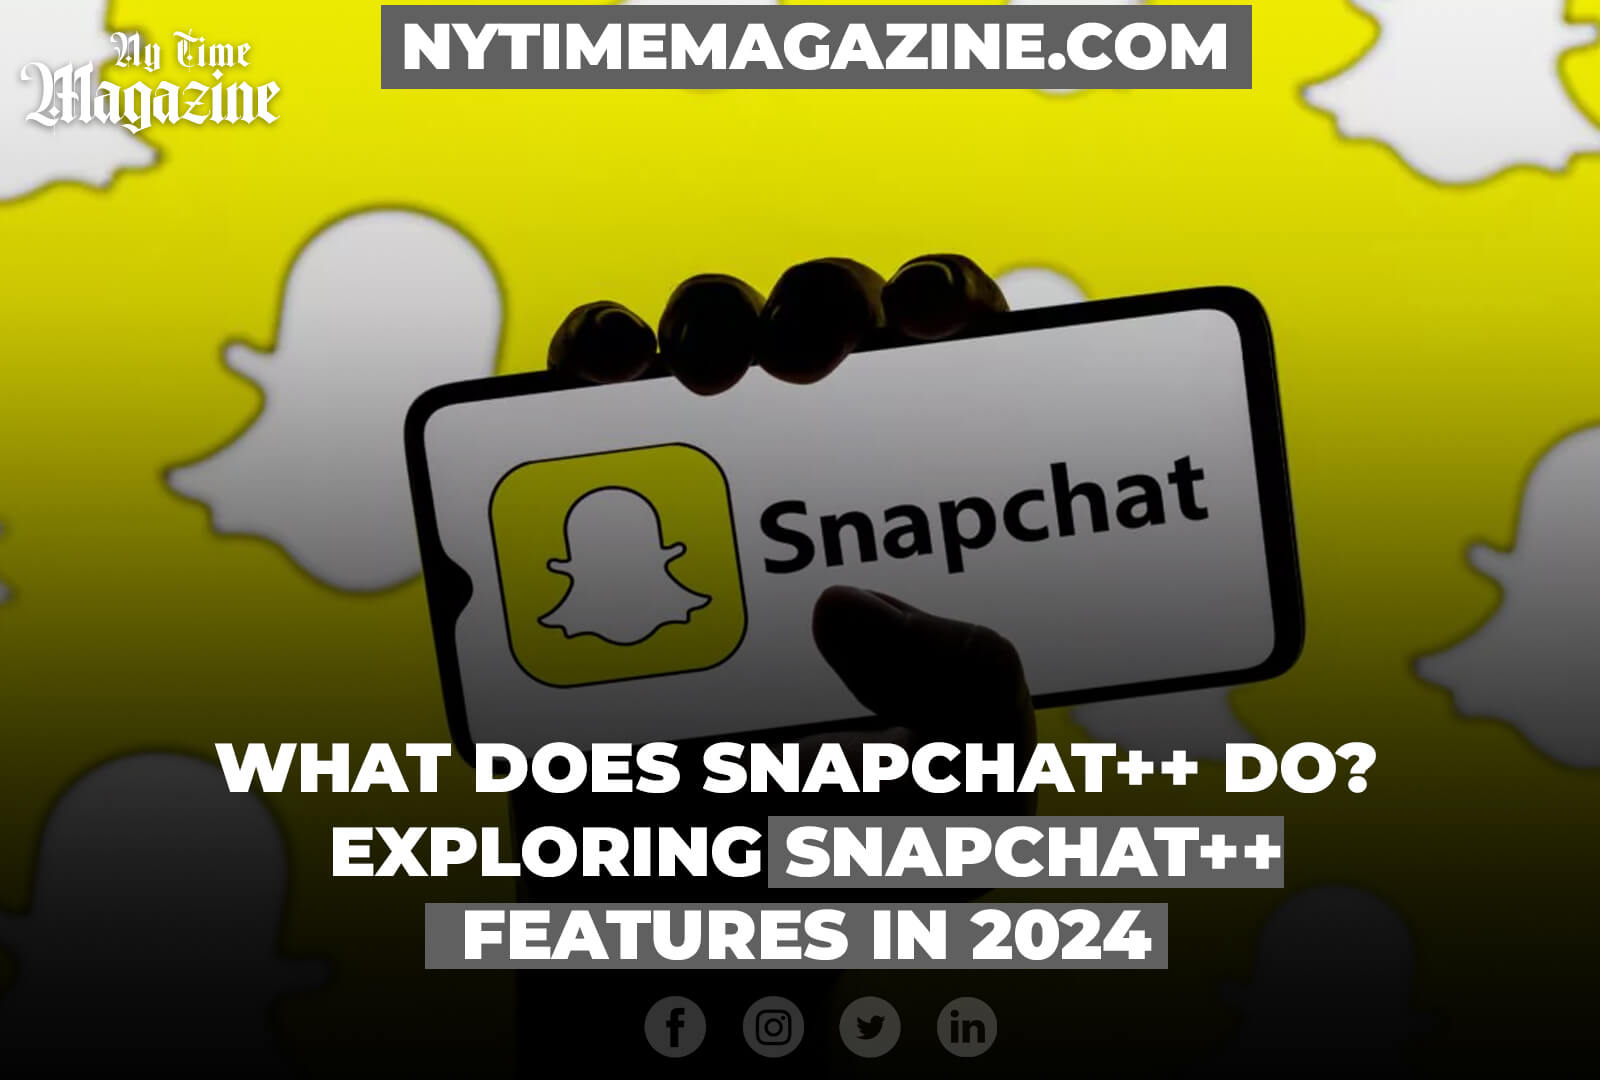 What Does Snapchat++ Do? Exploring Snapchat++ Features in 2024